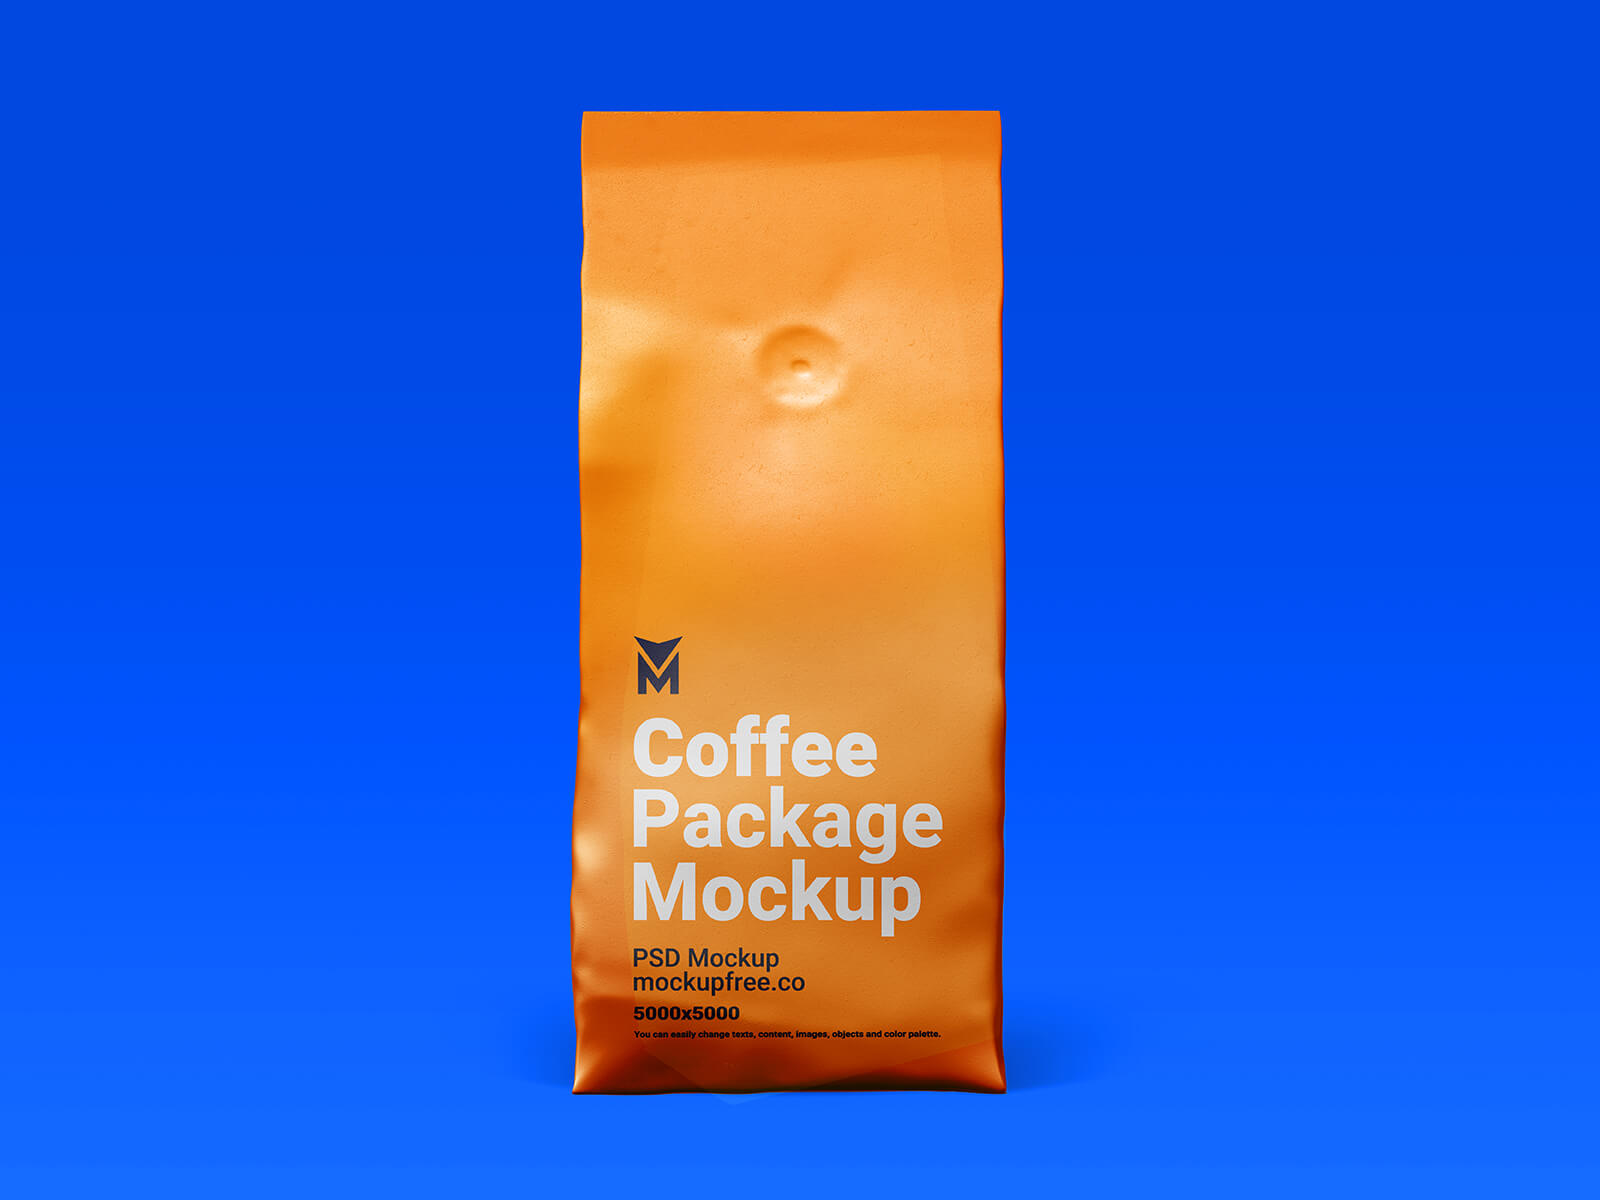 Free Stand-up Pouch Coffee Bag Packaging Mockup PSD Set